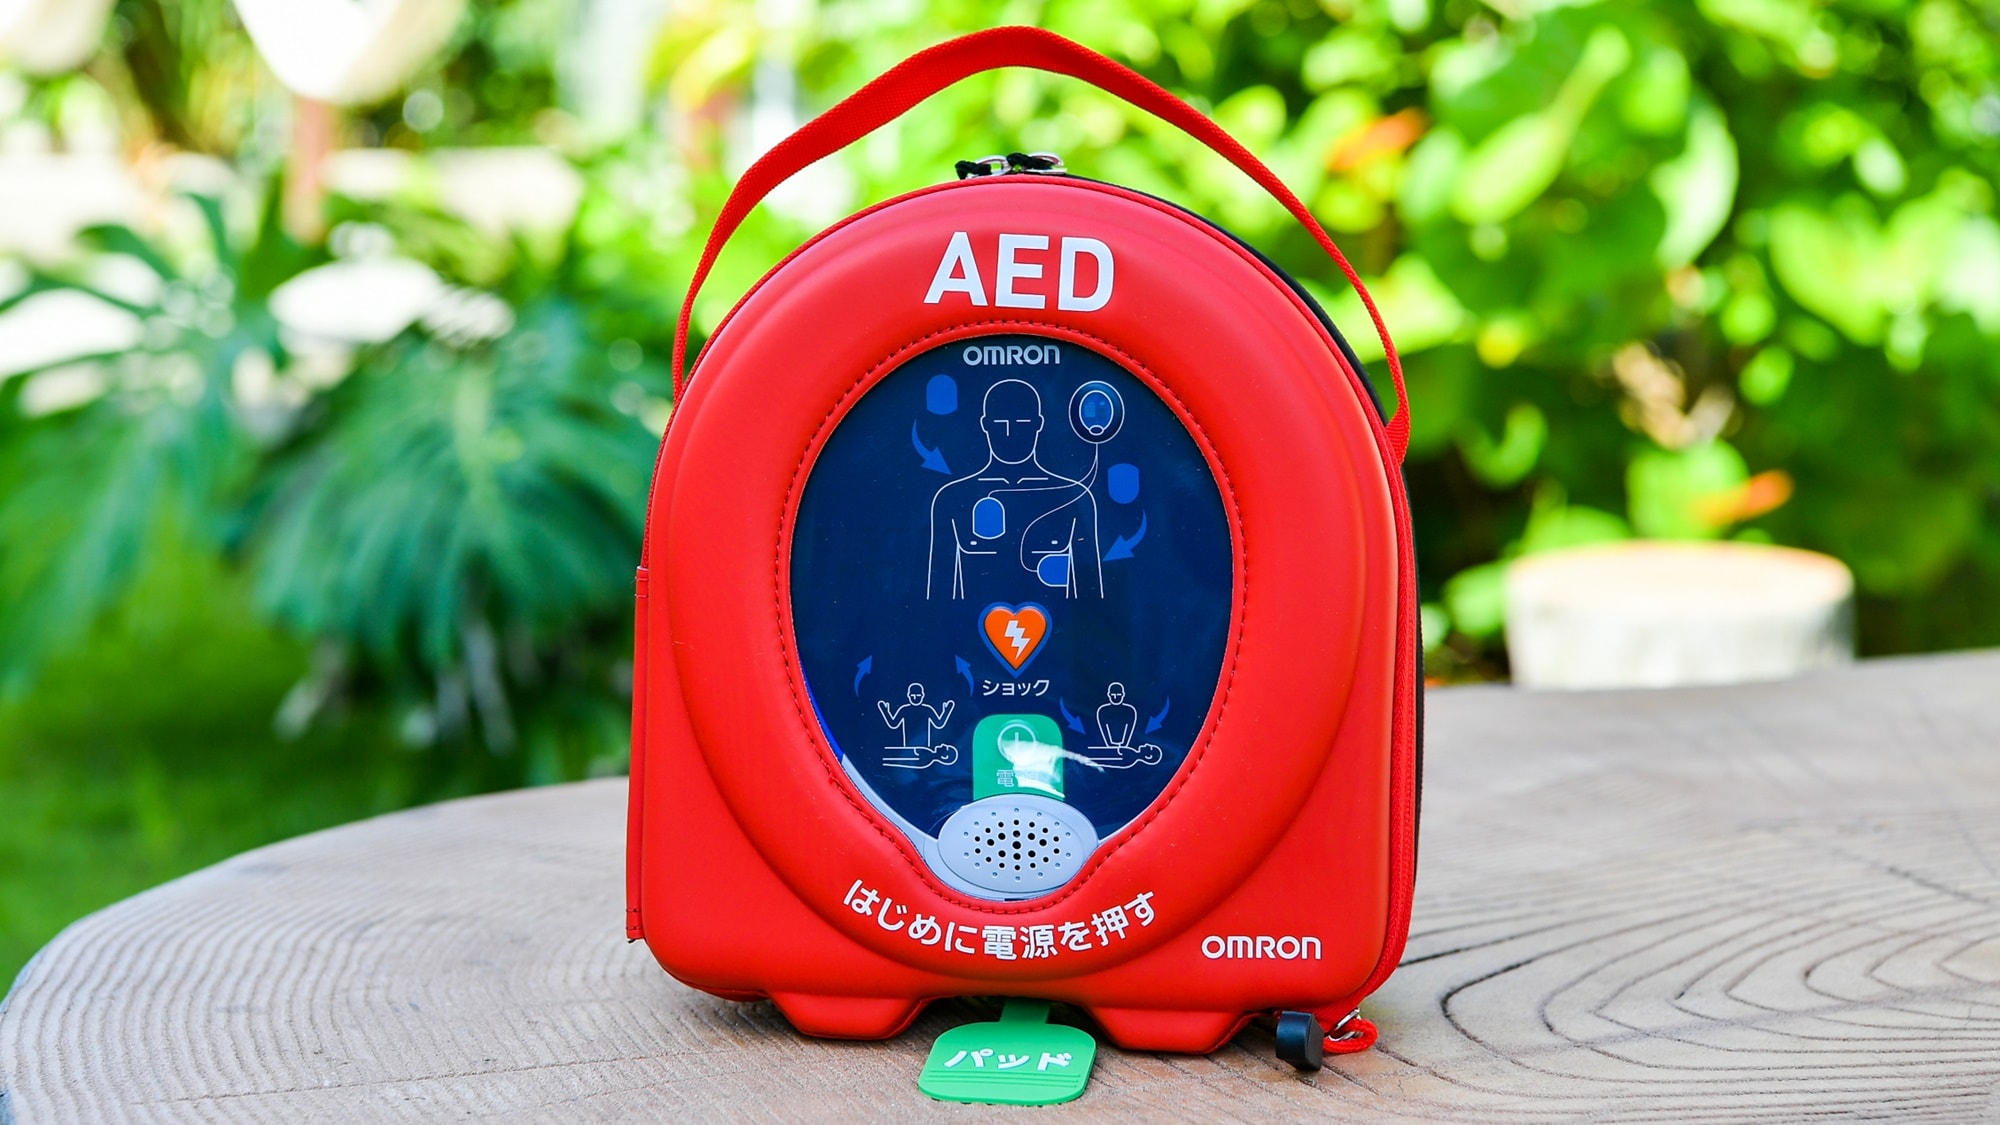 [Other facilities in the building] AED